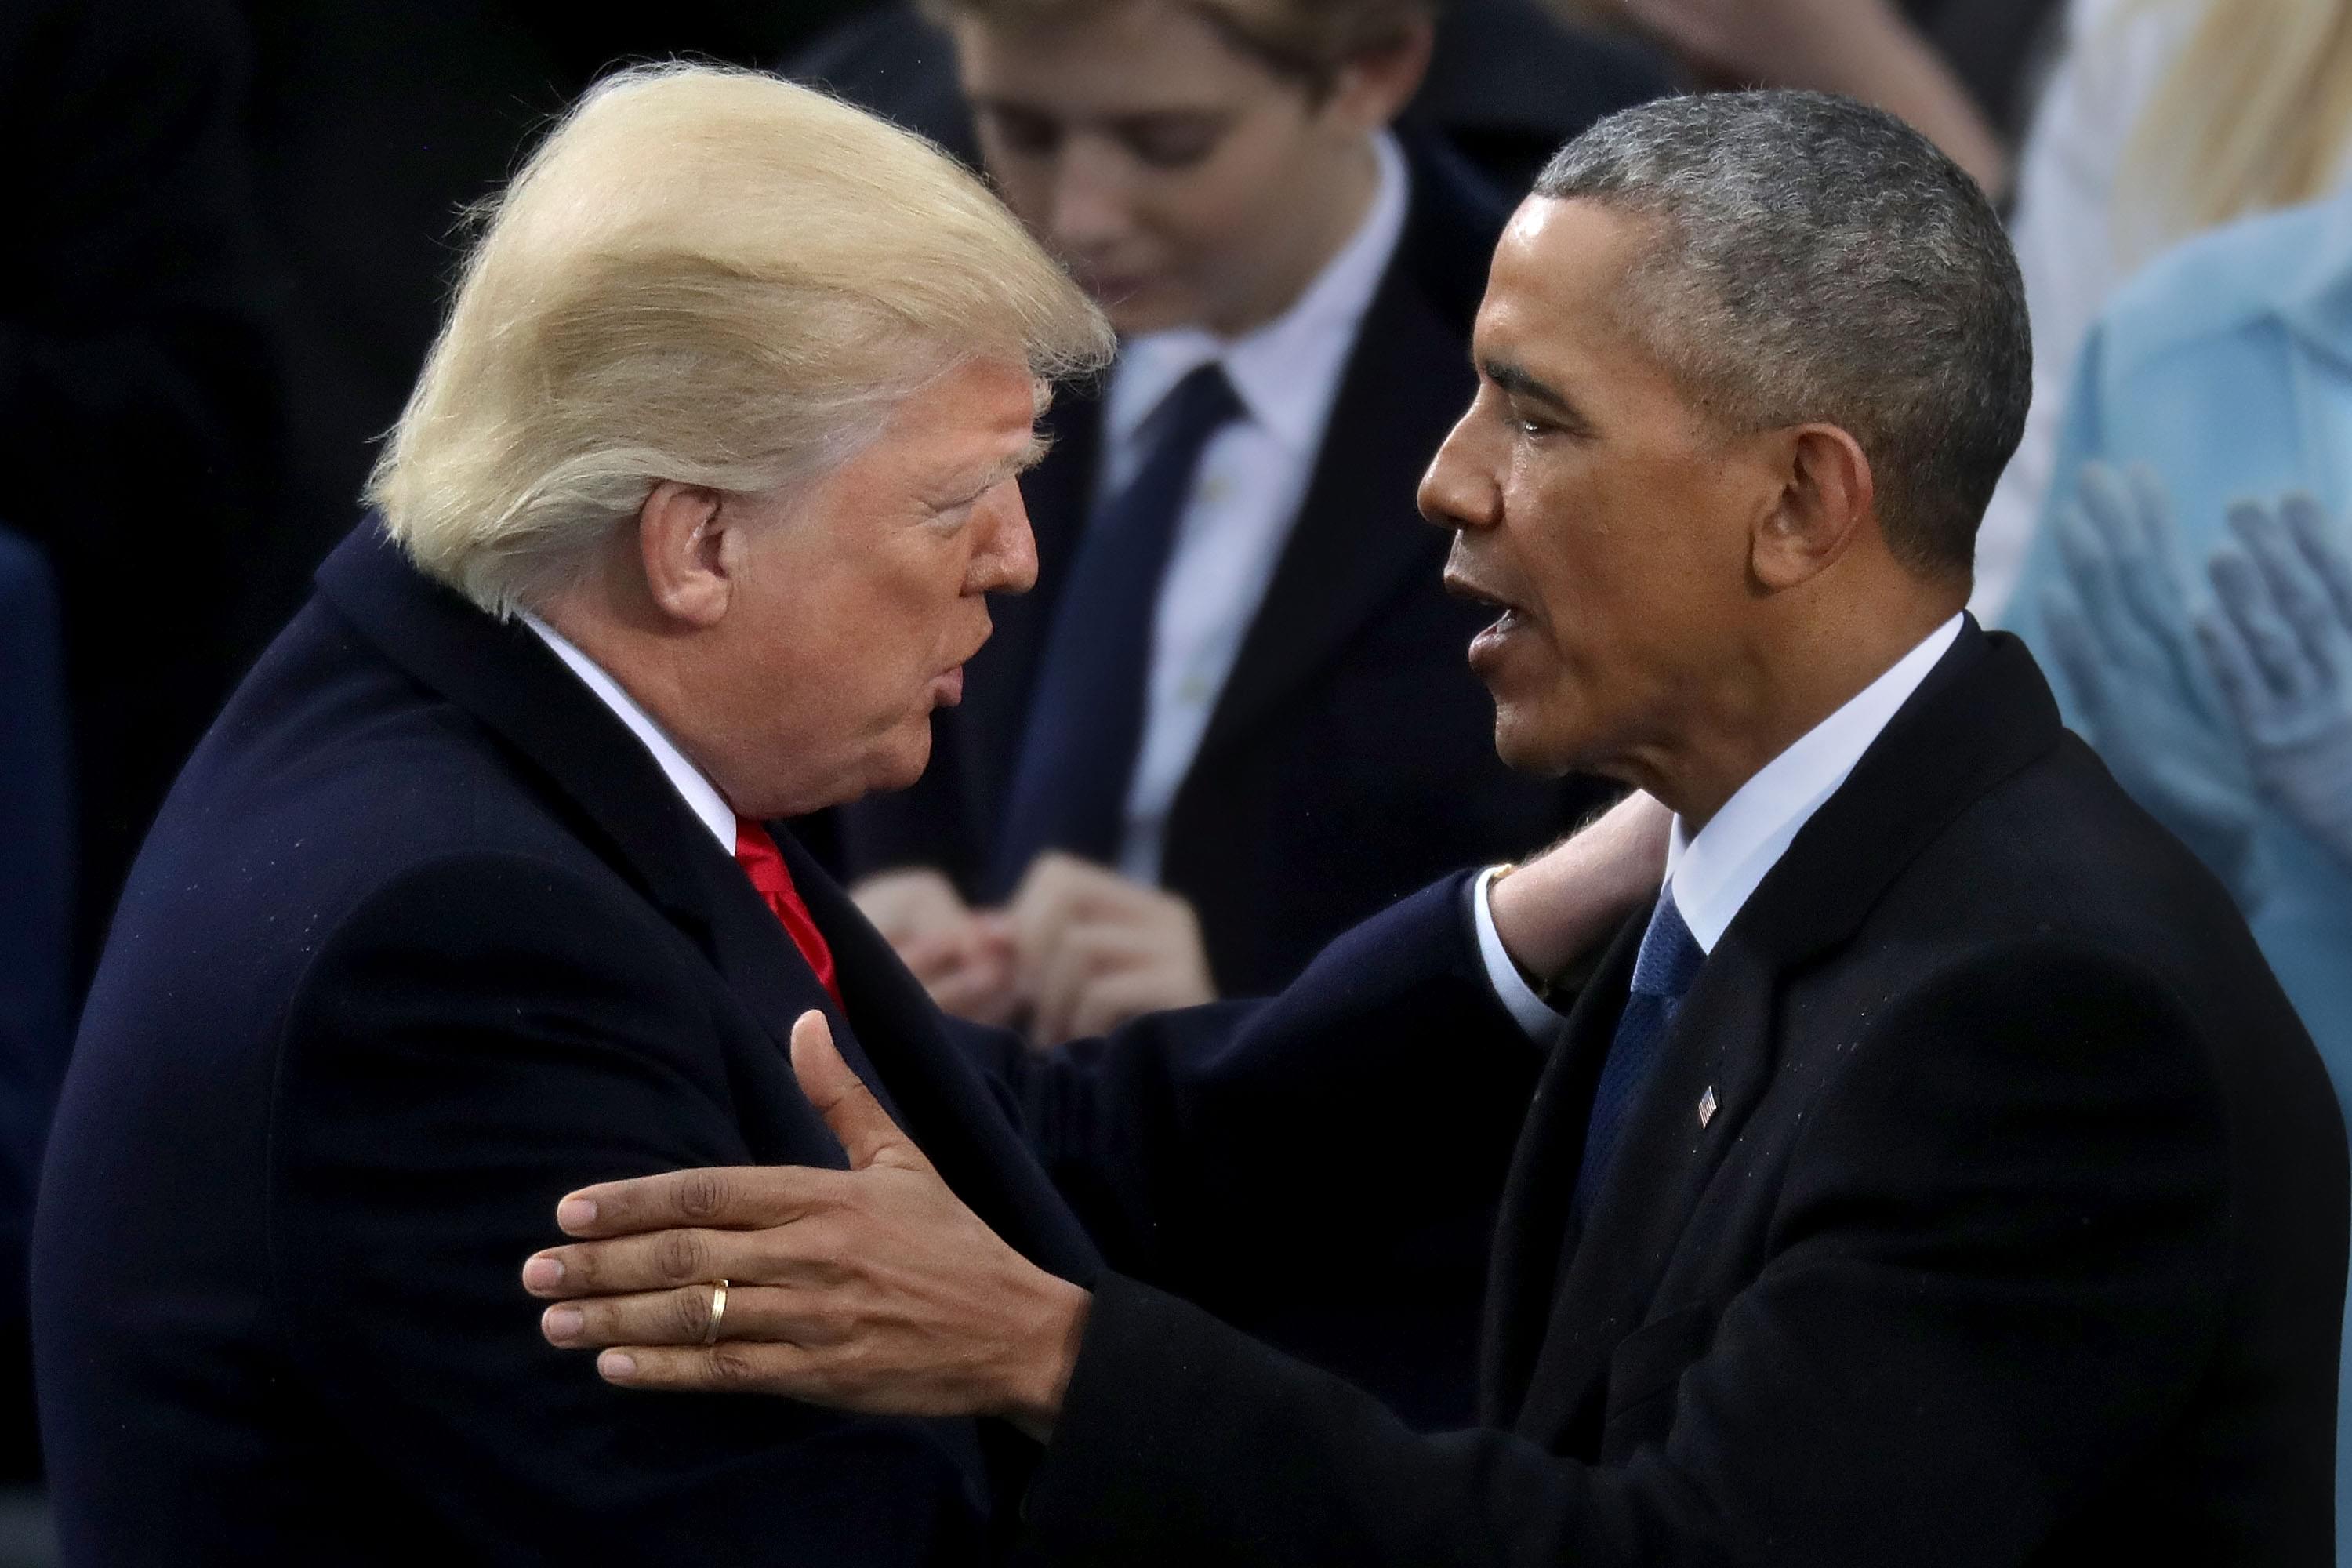 Donald Trump And Barack Obama Tie As “Most Admired Man” On Gallup’s Annual Poll